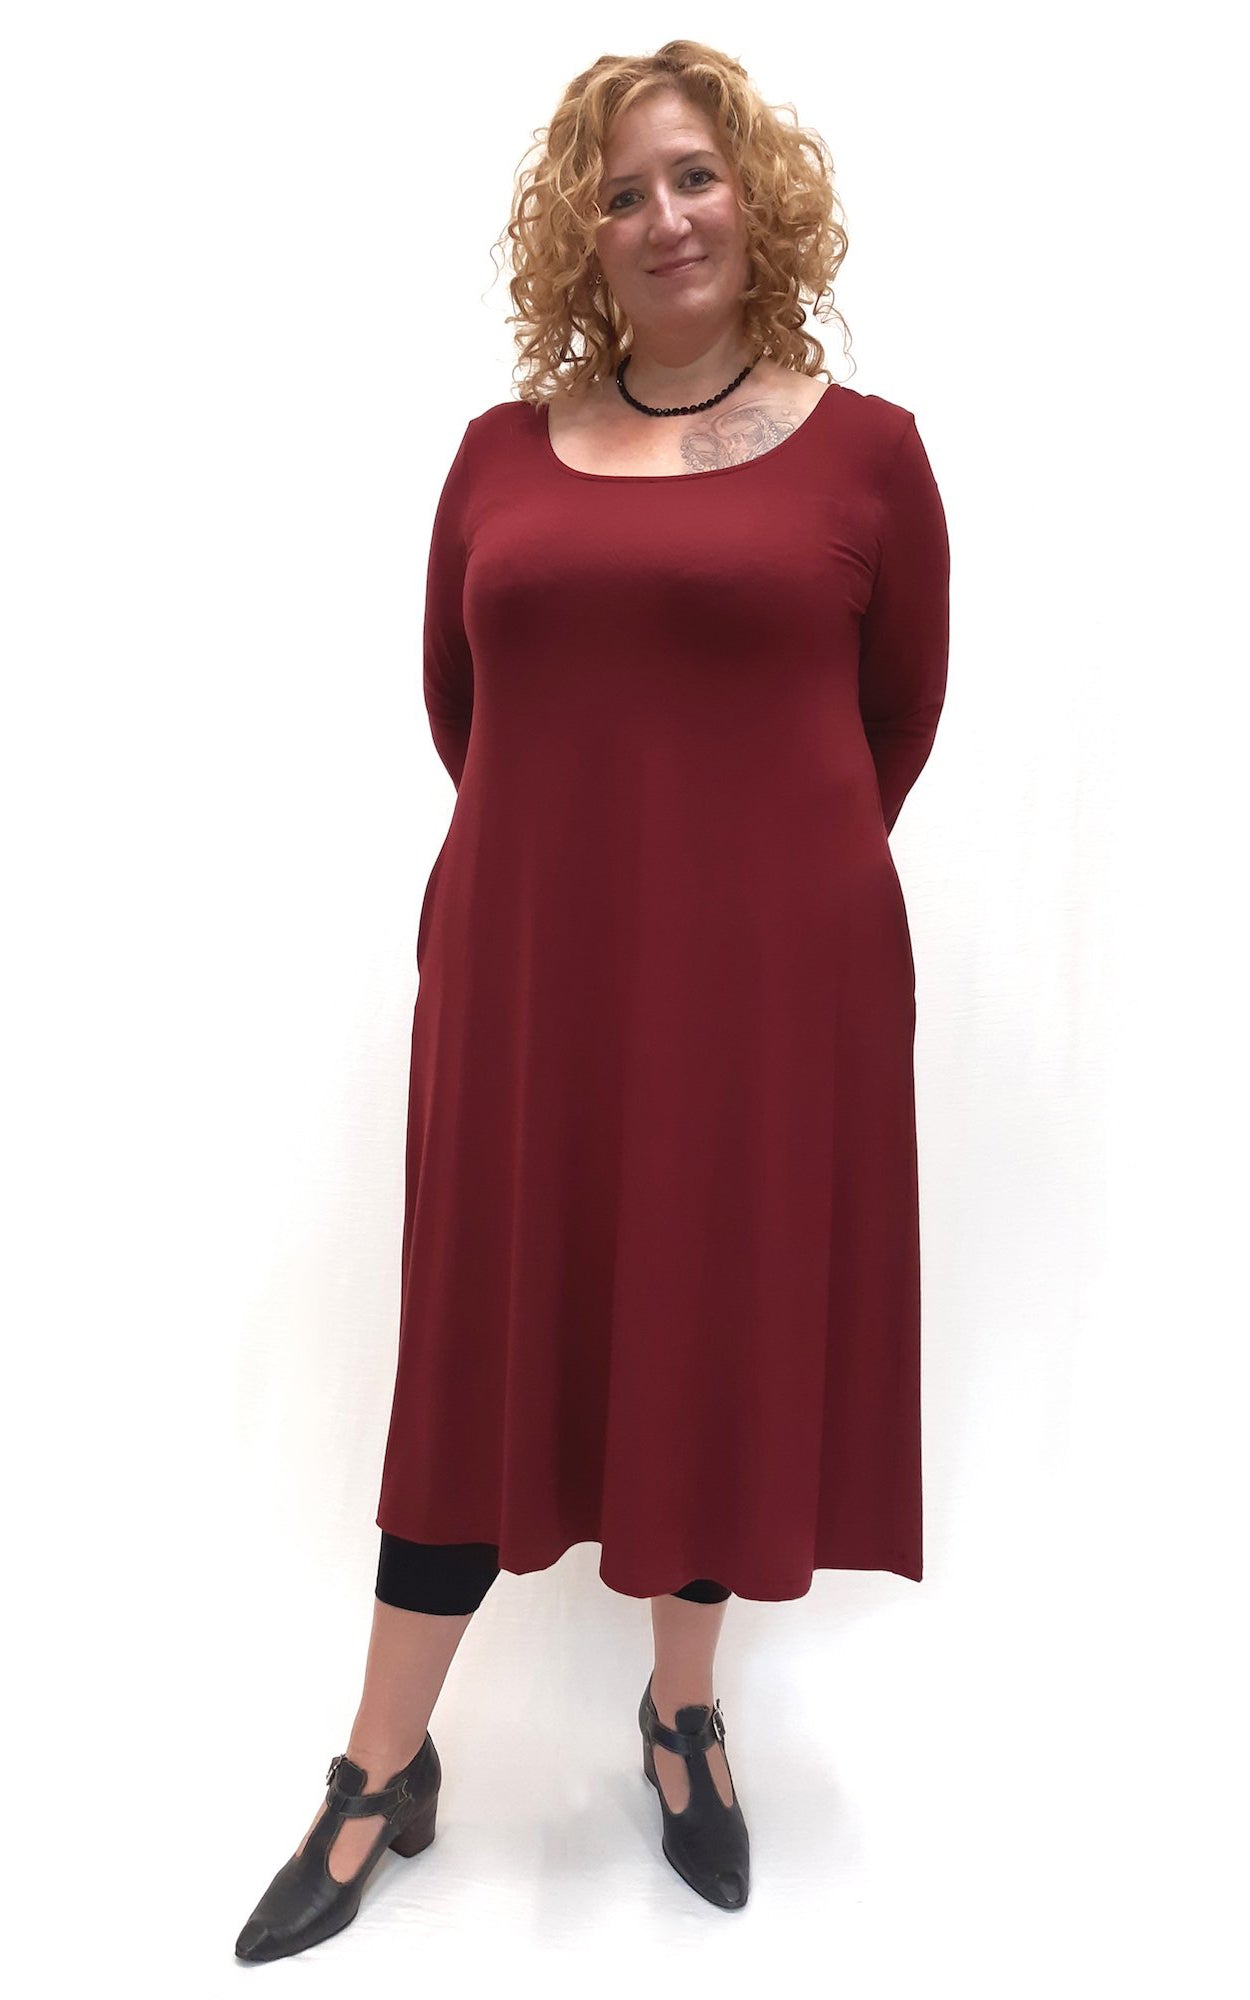 Burgundy bamboo jersey long tunic dress with pockets and 3/4 sleeve, size XXL by Brenda Laine Designs